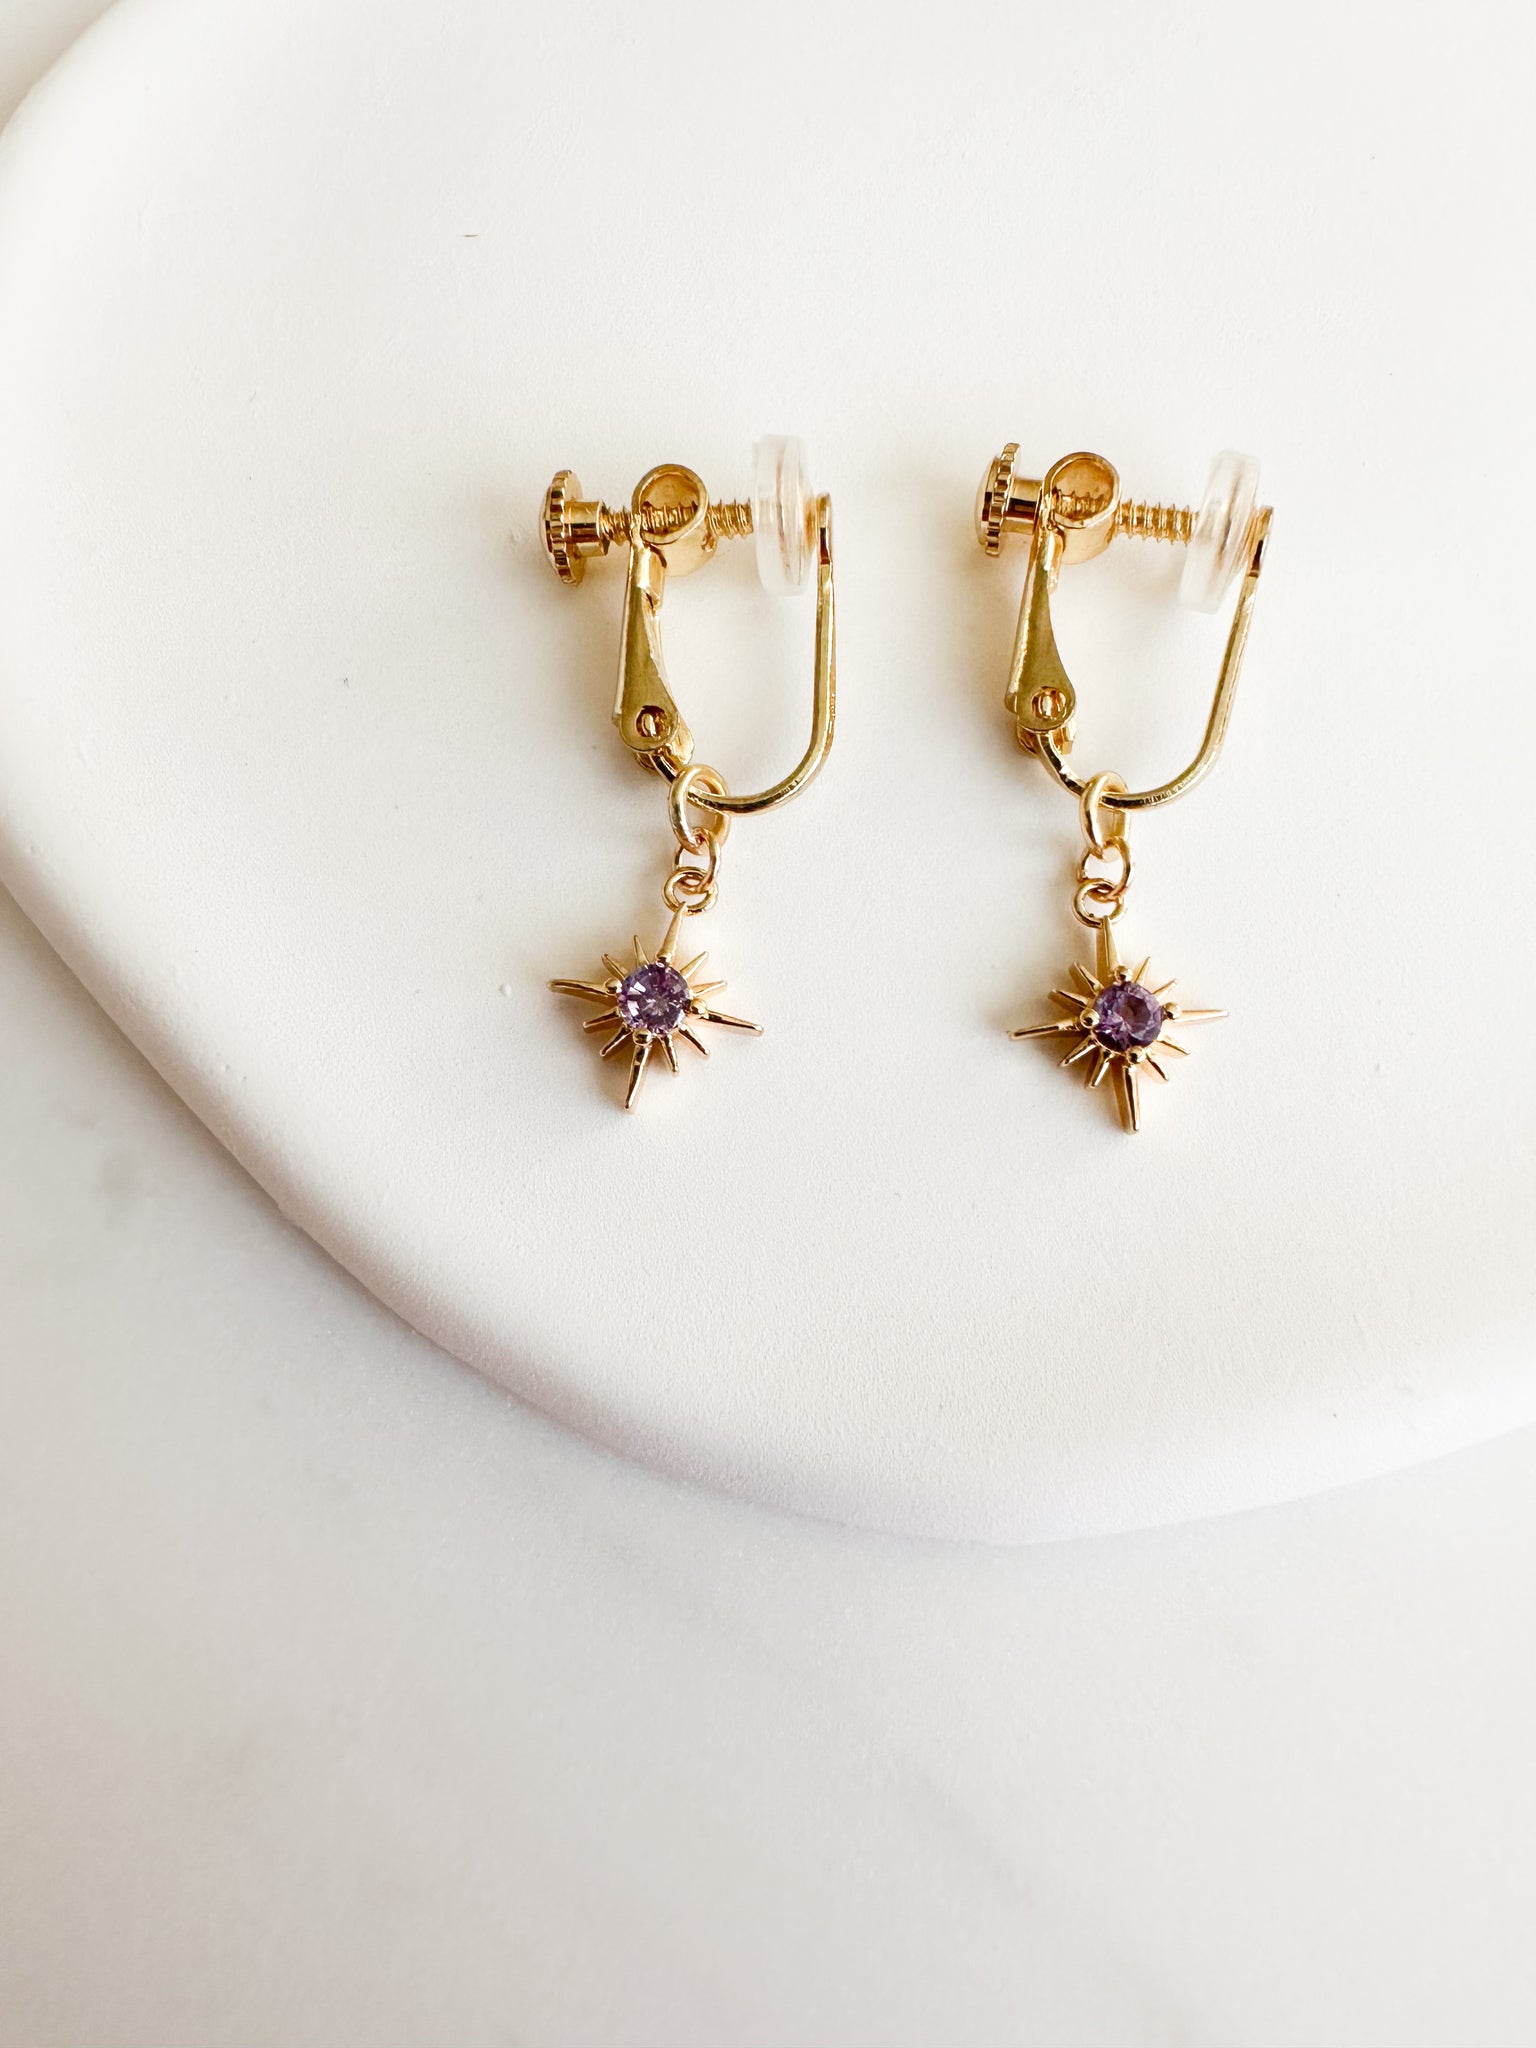 gold screwback clipon earrings with gold constellation charm with dark purple circle gem in middle